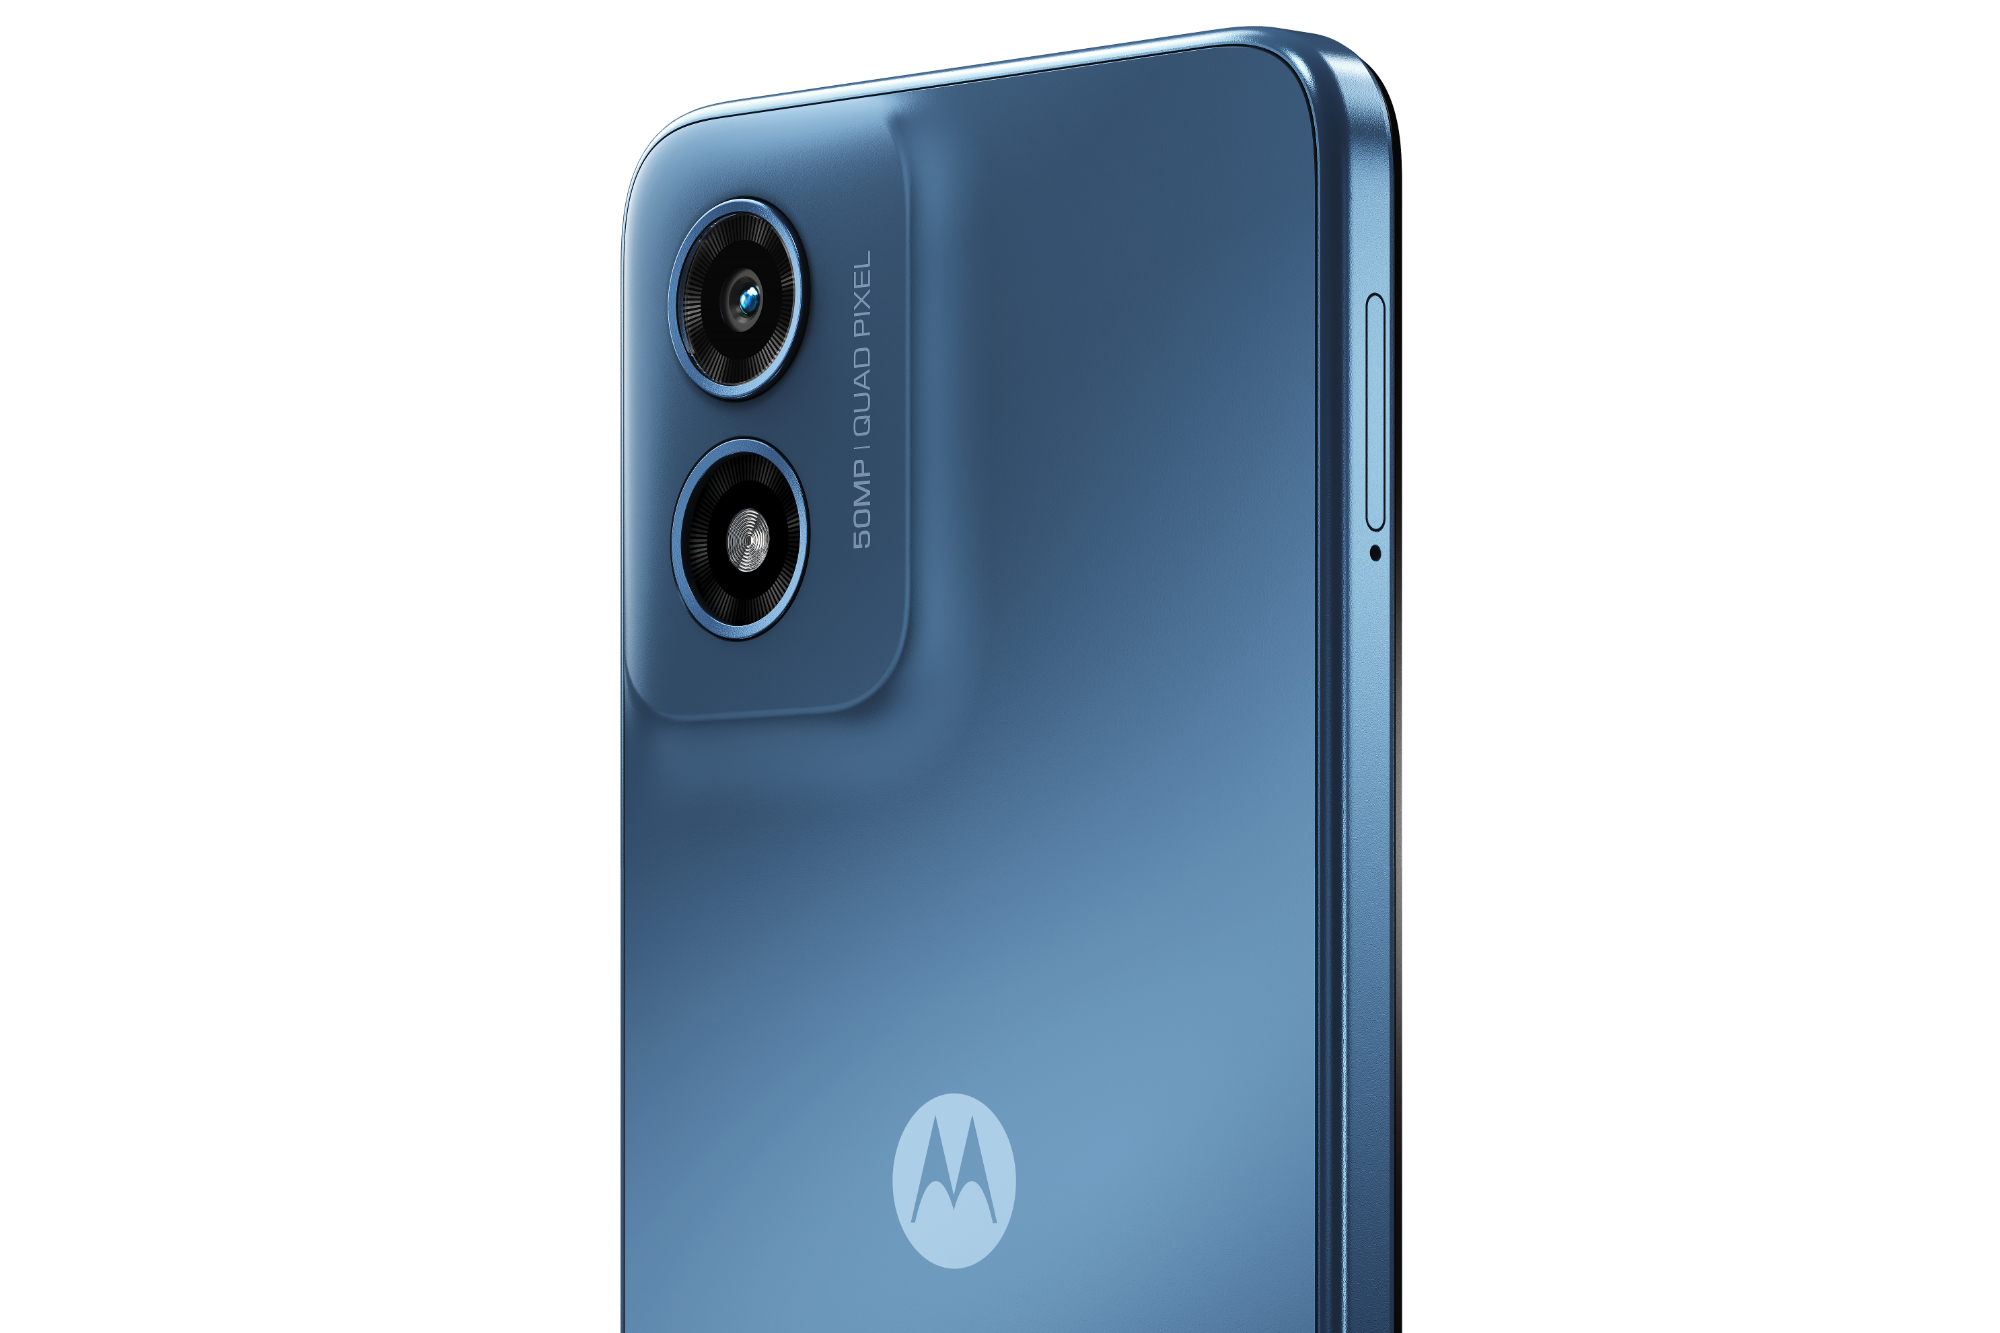 Motorola's newest cheap Android phone looks shockingly good